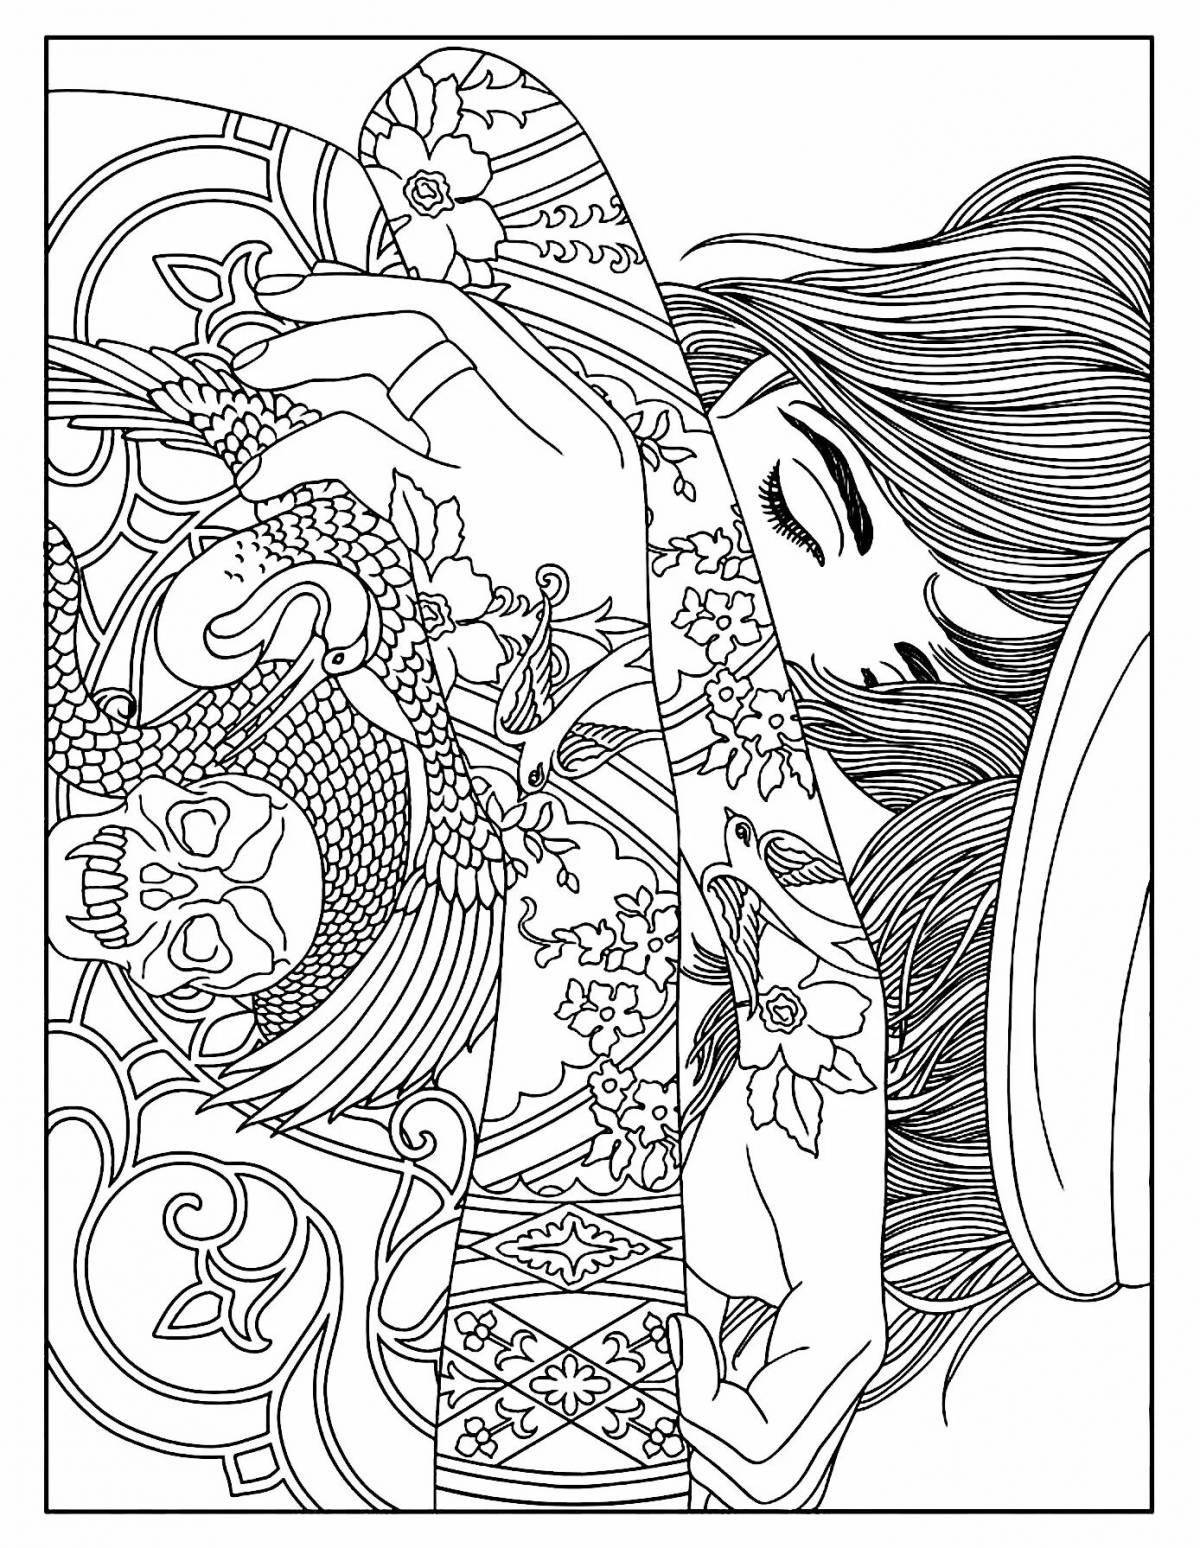 Attractive psychological anti-stress coloring book